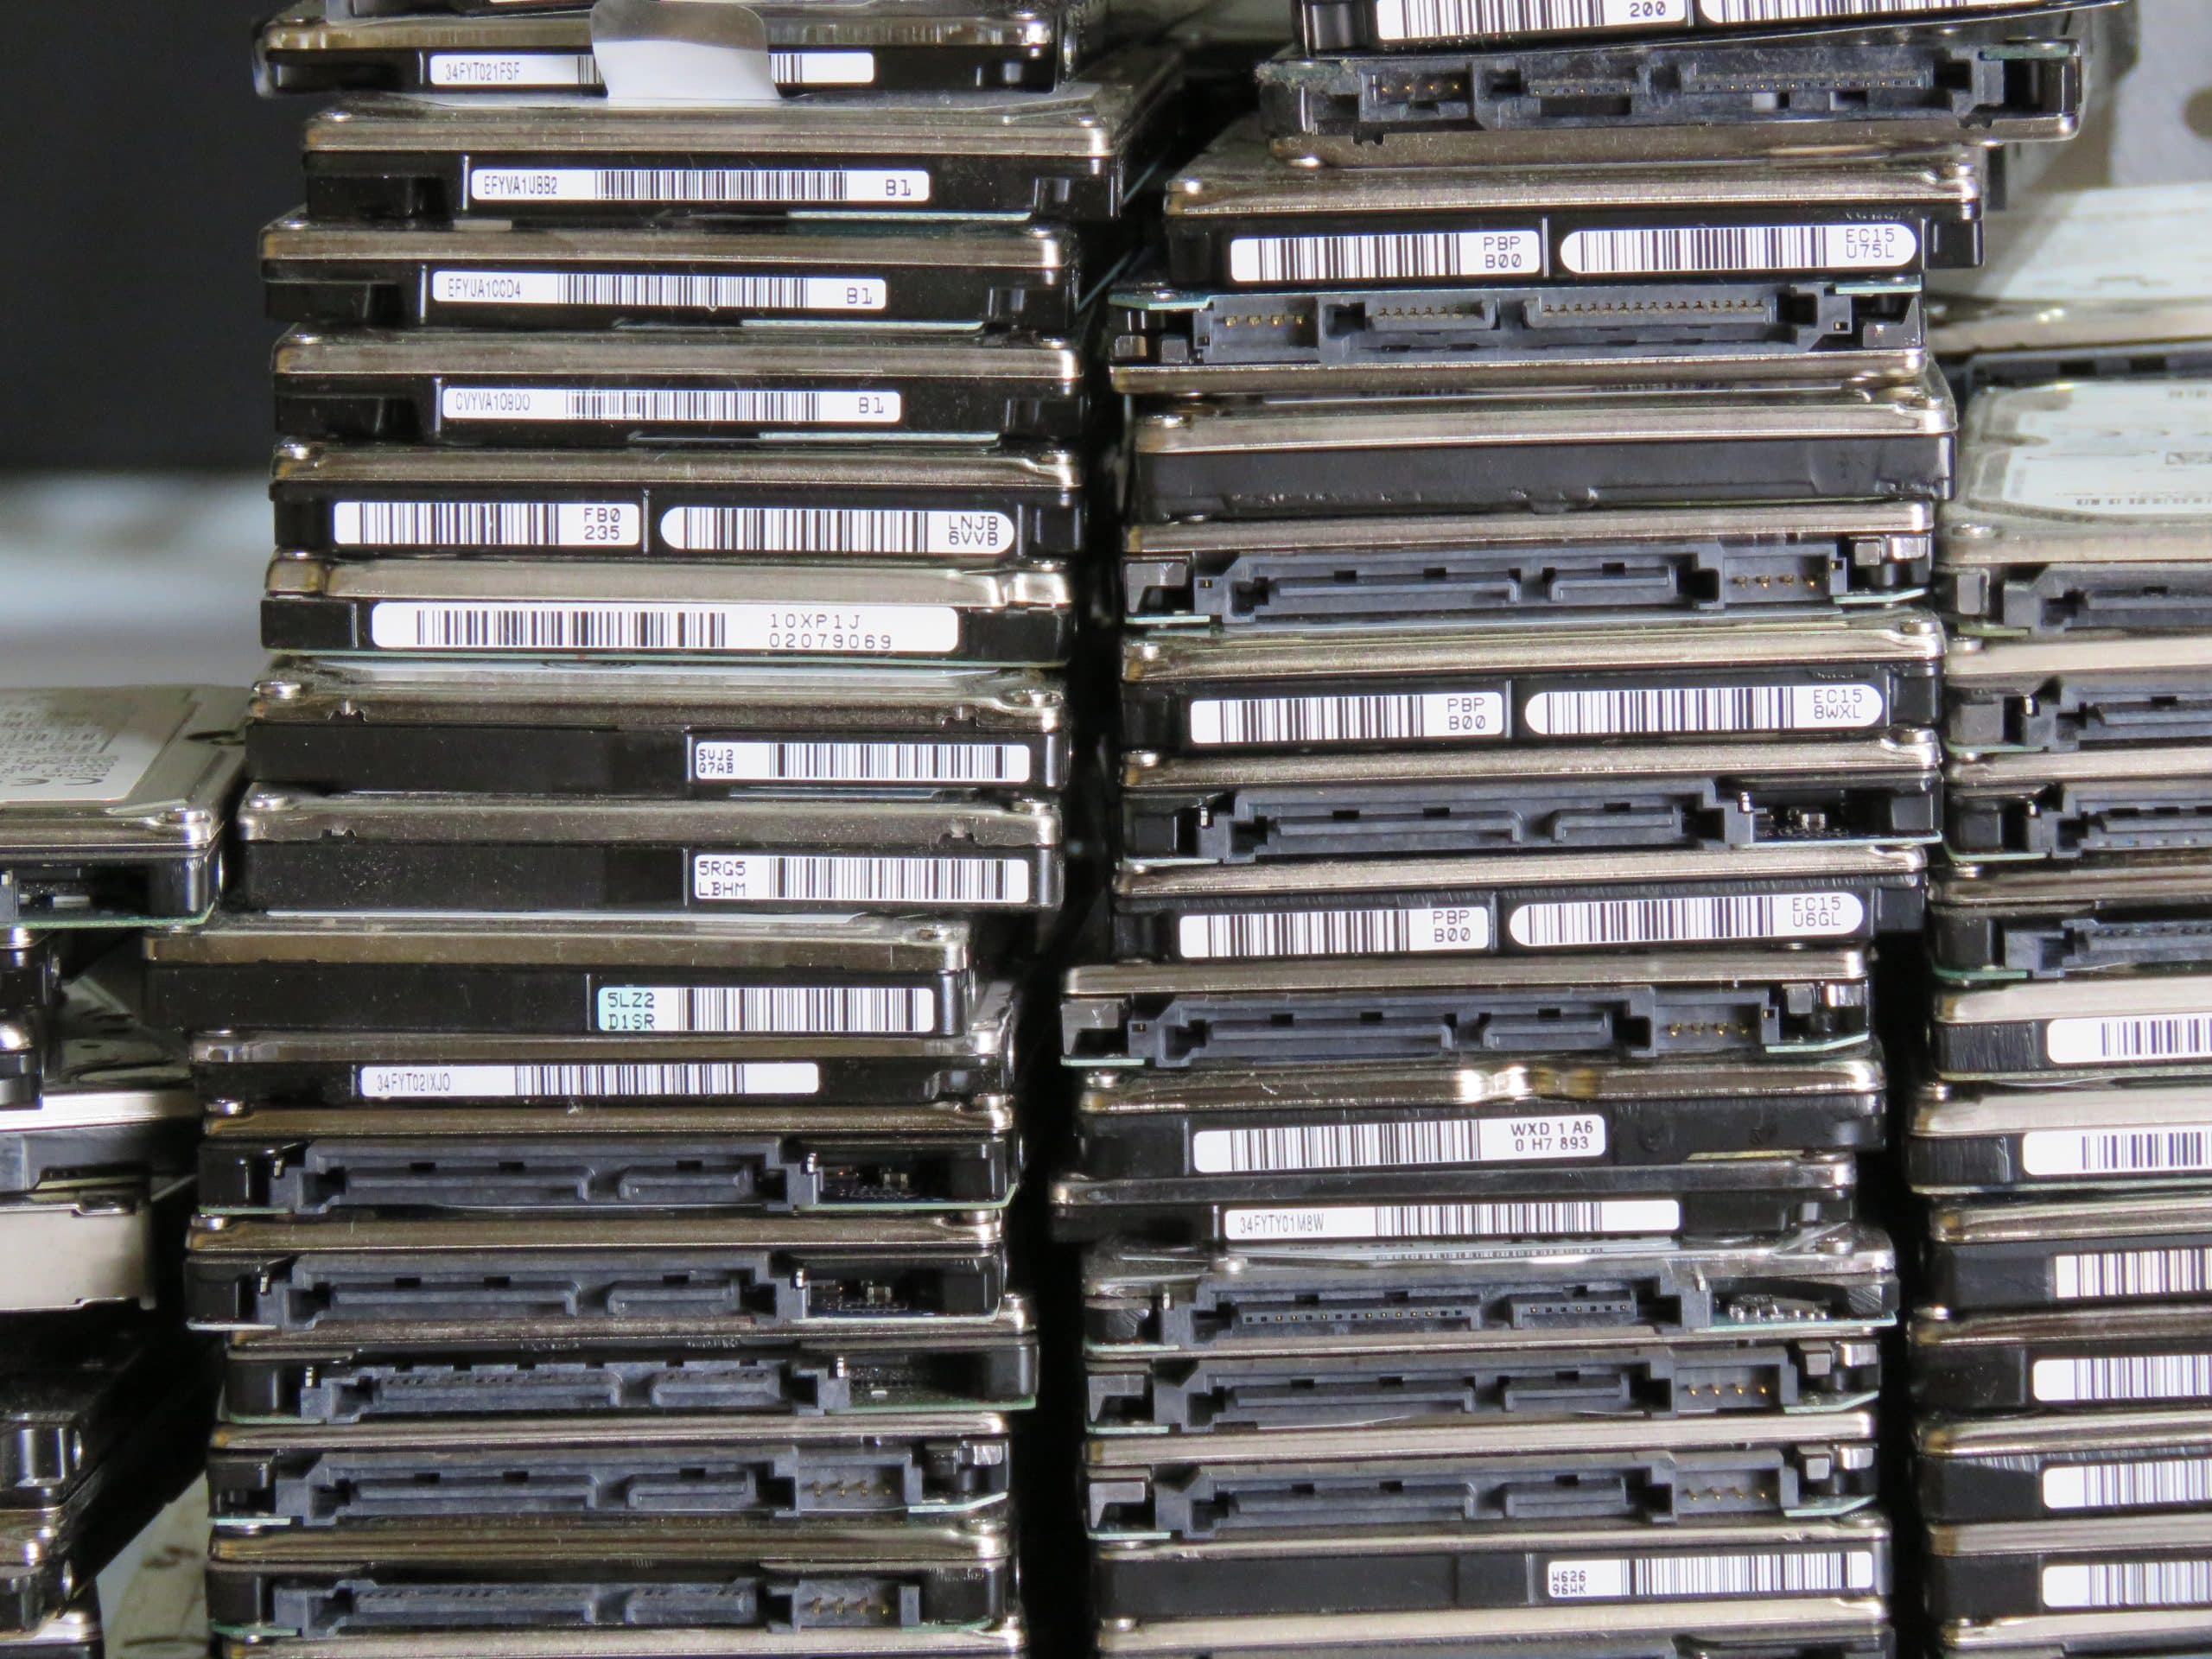 Hard drives scaled